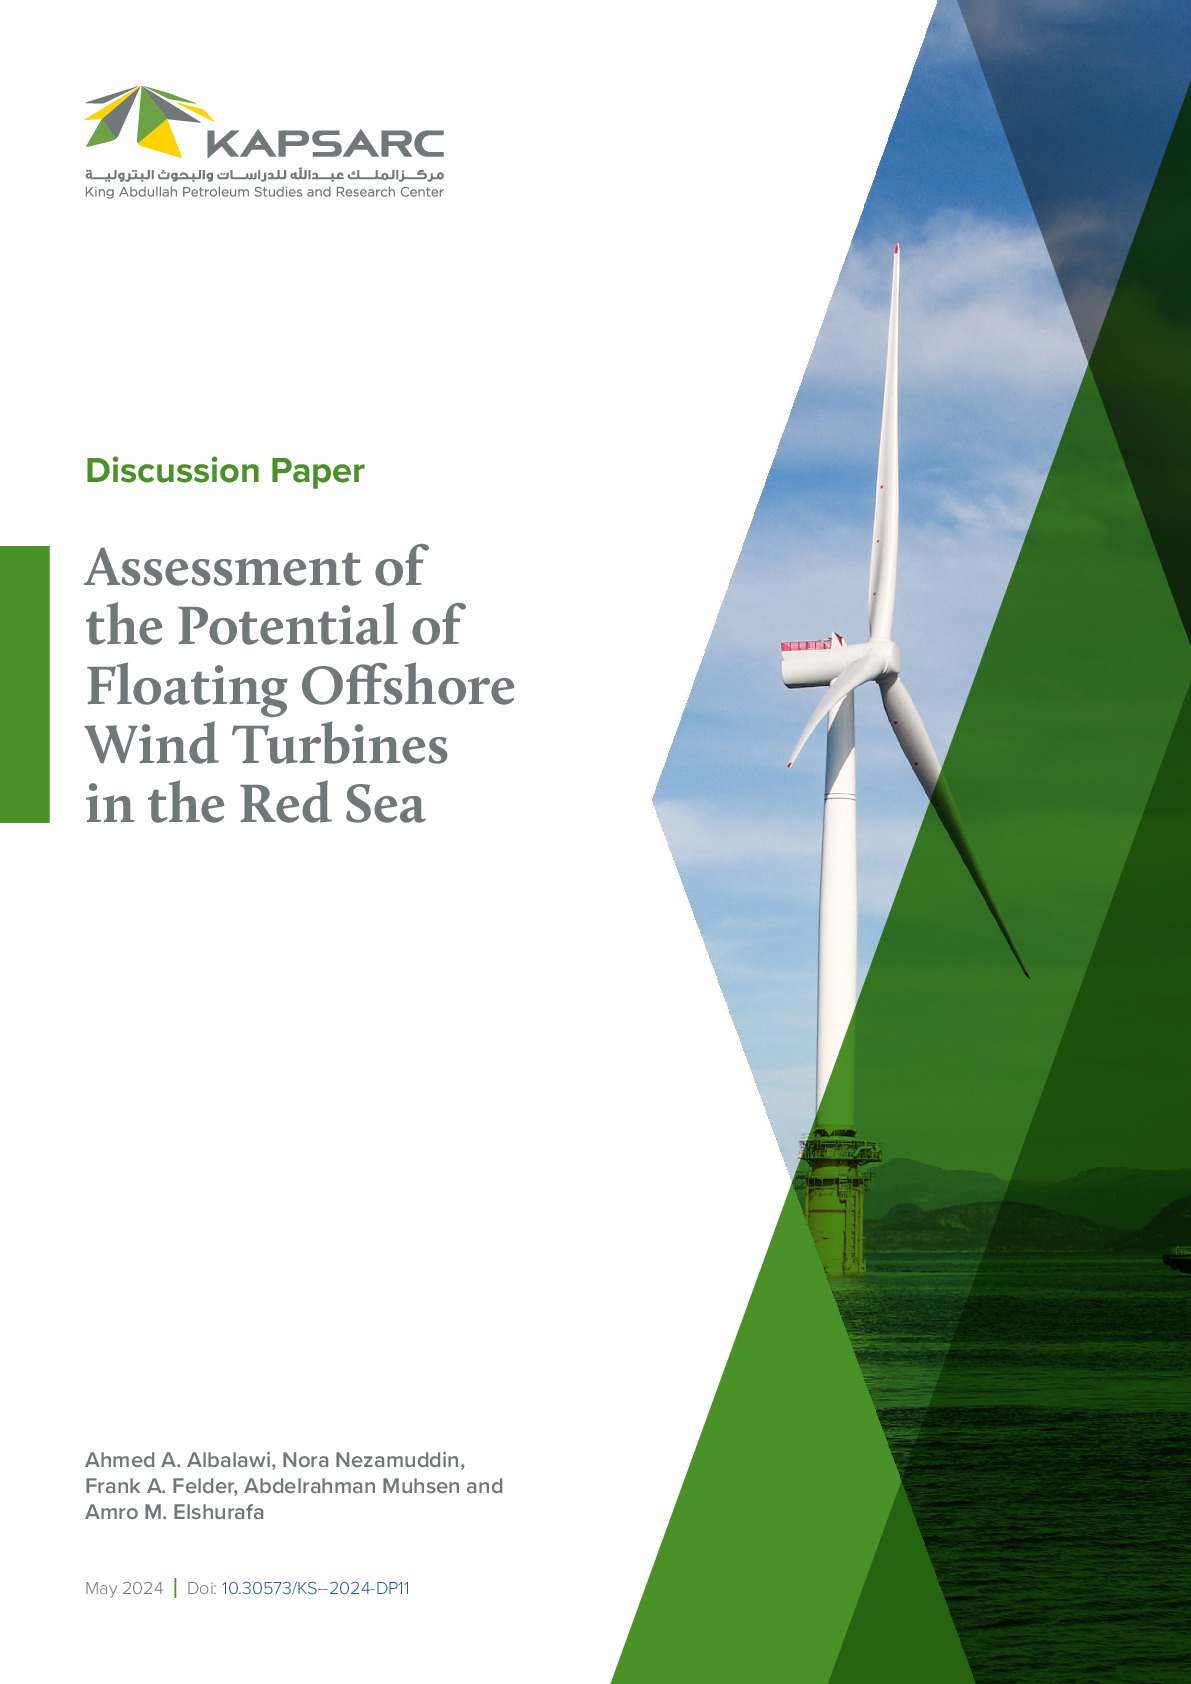 Assessment of the Potential of Floating Offshore Wind Turbines in the Red Sea